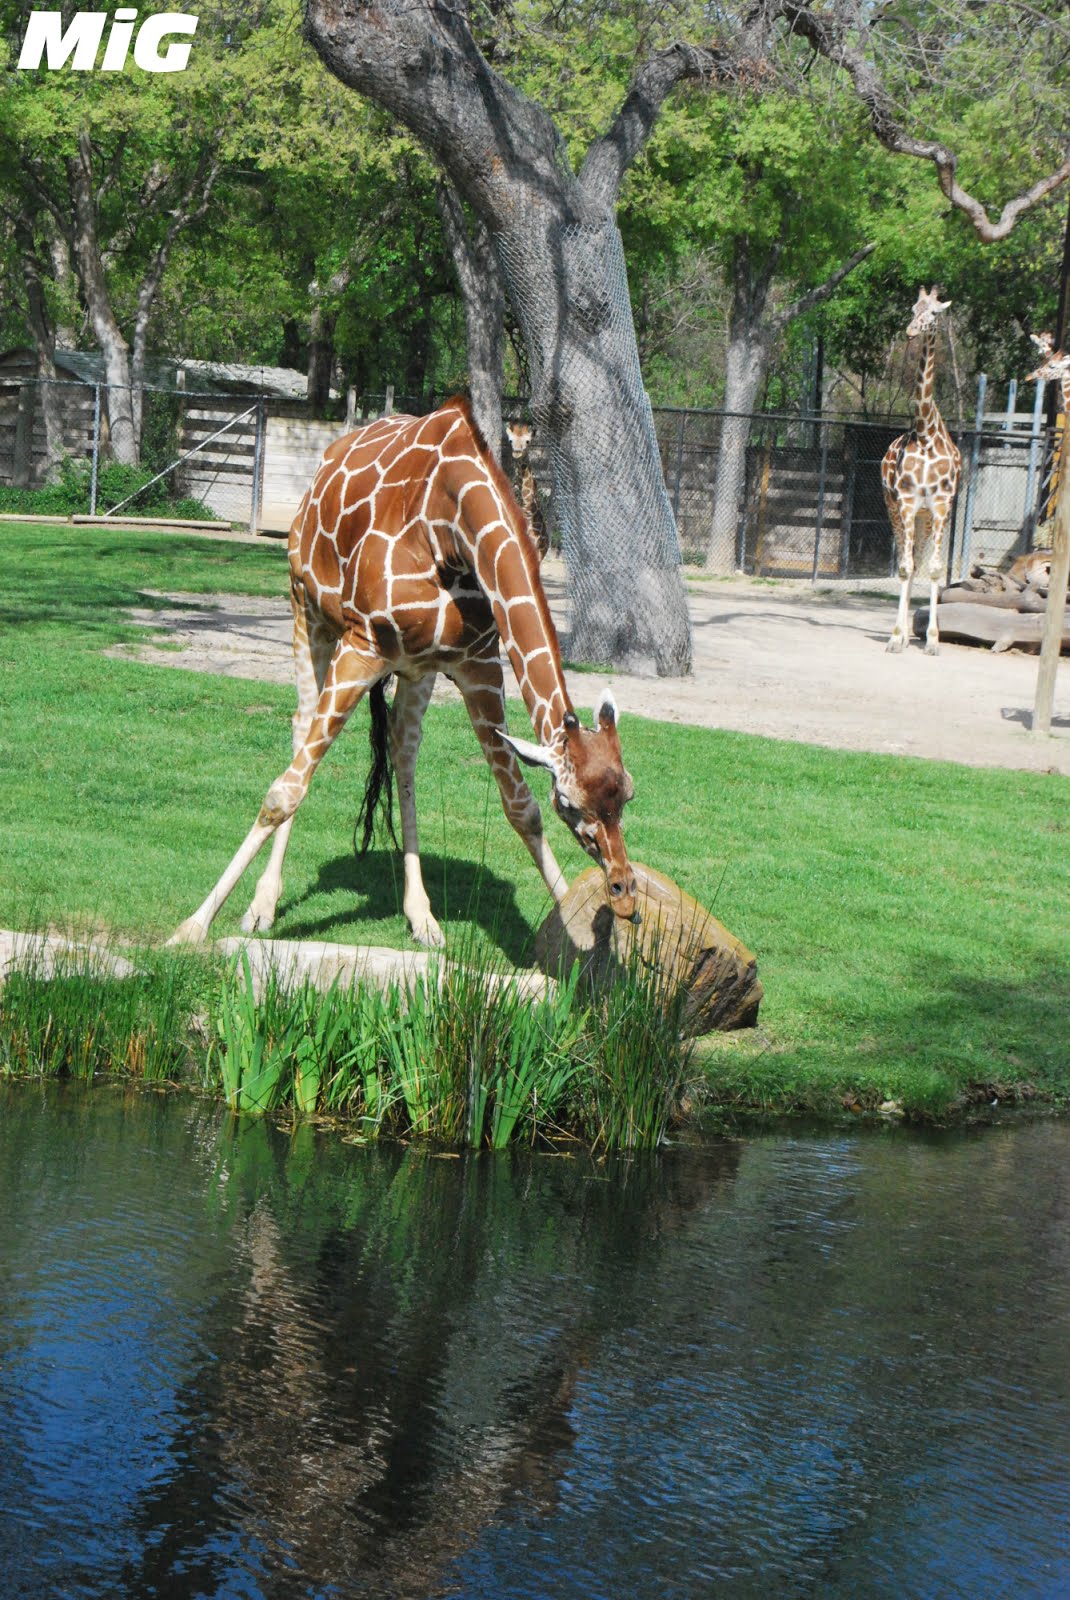 MidwestInfoGuide: Fort Worth Zoo